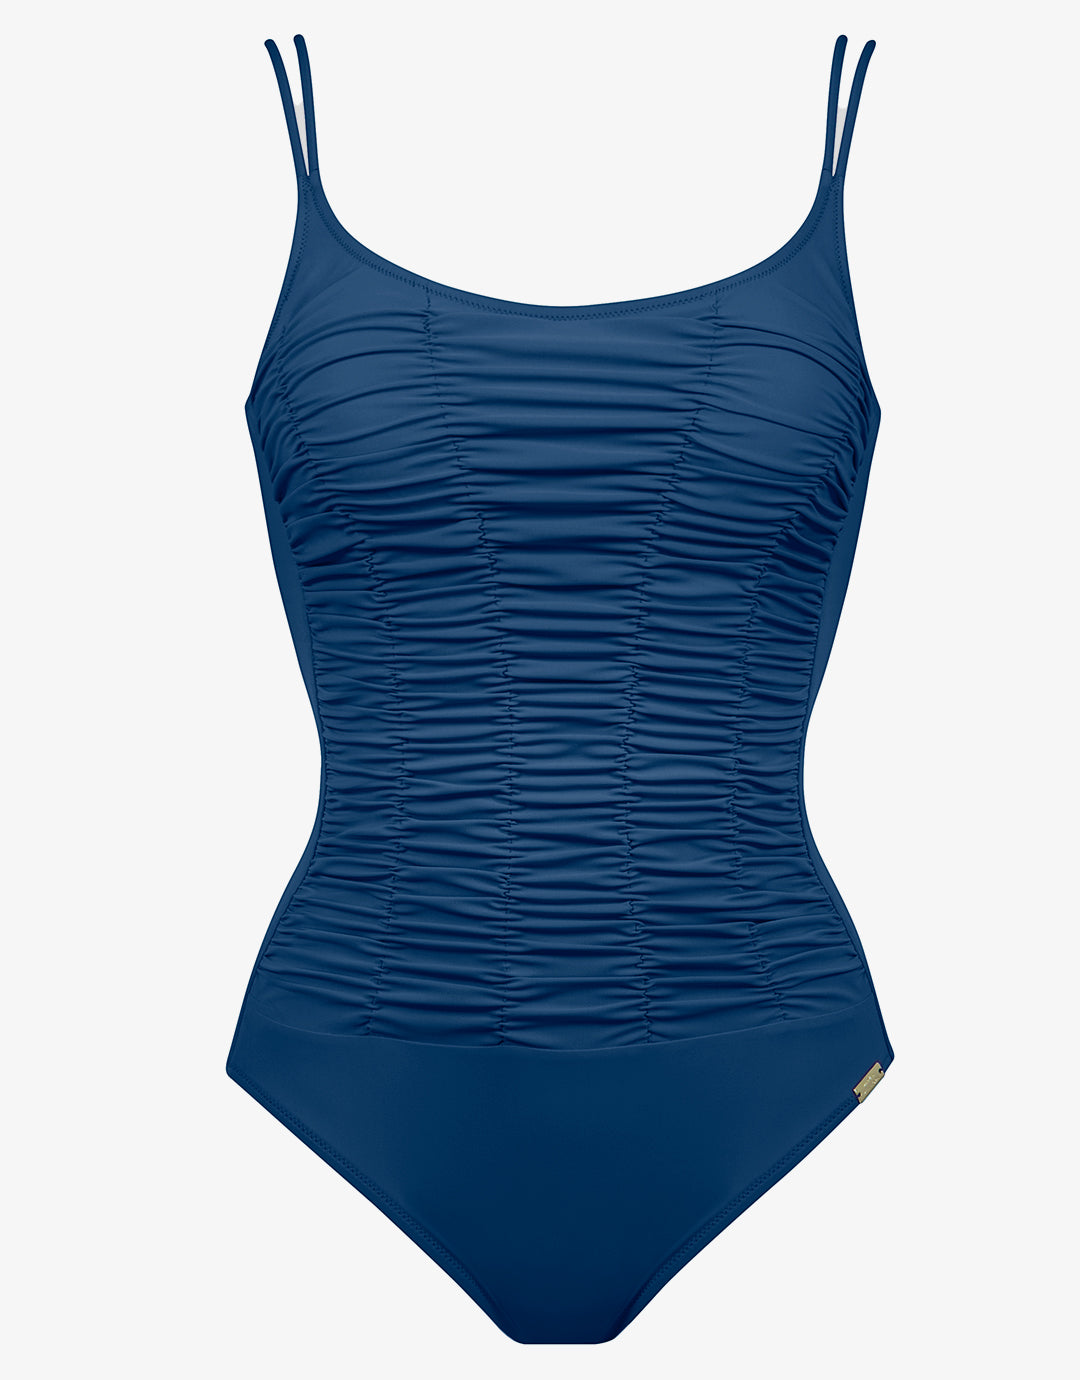 Elements Underwired Swimsuit - Lake - Simply Beach UK